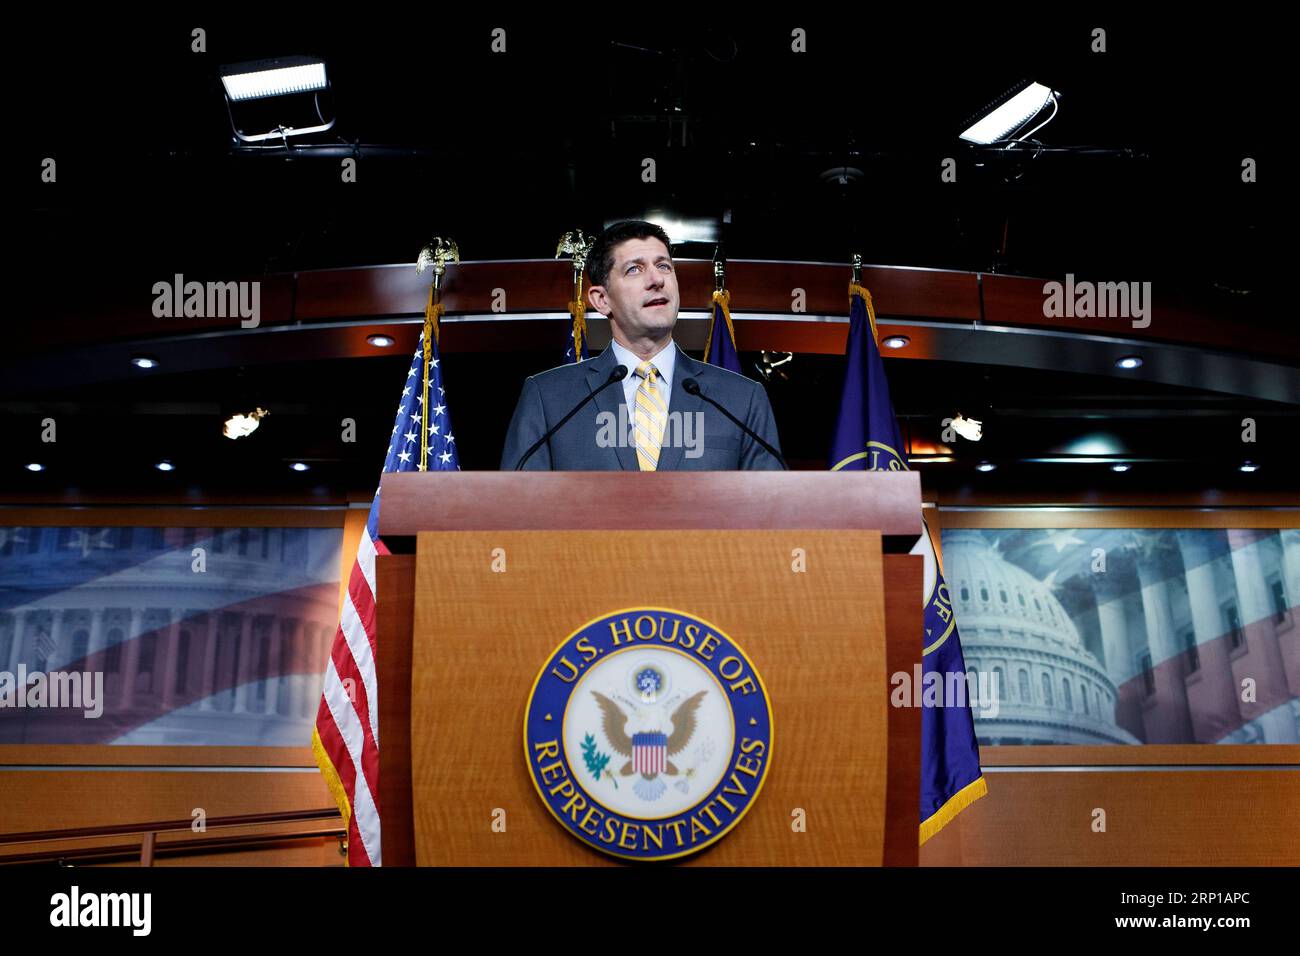 (180621) -- WASHINGTON, June 21, 2018 -- U.S. House Speaker Paul Ryan holds a press conference on the immigration bill on Capitol Hill in Washington D.C., the United States, on June 21, 2018. Republican leaders in the U.S. House of Representatives on Thursday delayed a vote on a moderate immigration bill amid chaos over the White House practice of separating families who illegally cross the U.S. border. ) U.S.-WASHINGTON D.C.-IMMIGRATION BILL-VOTE-DELAY TingxShen PUBLICATIONxNOTxINxCHN Stock Photo